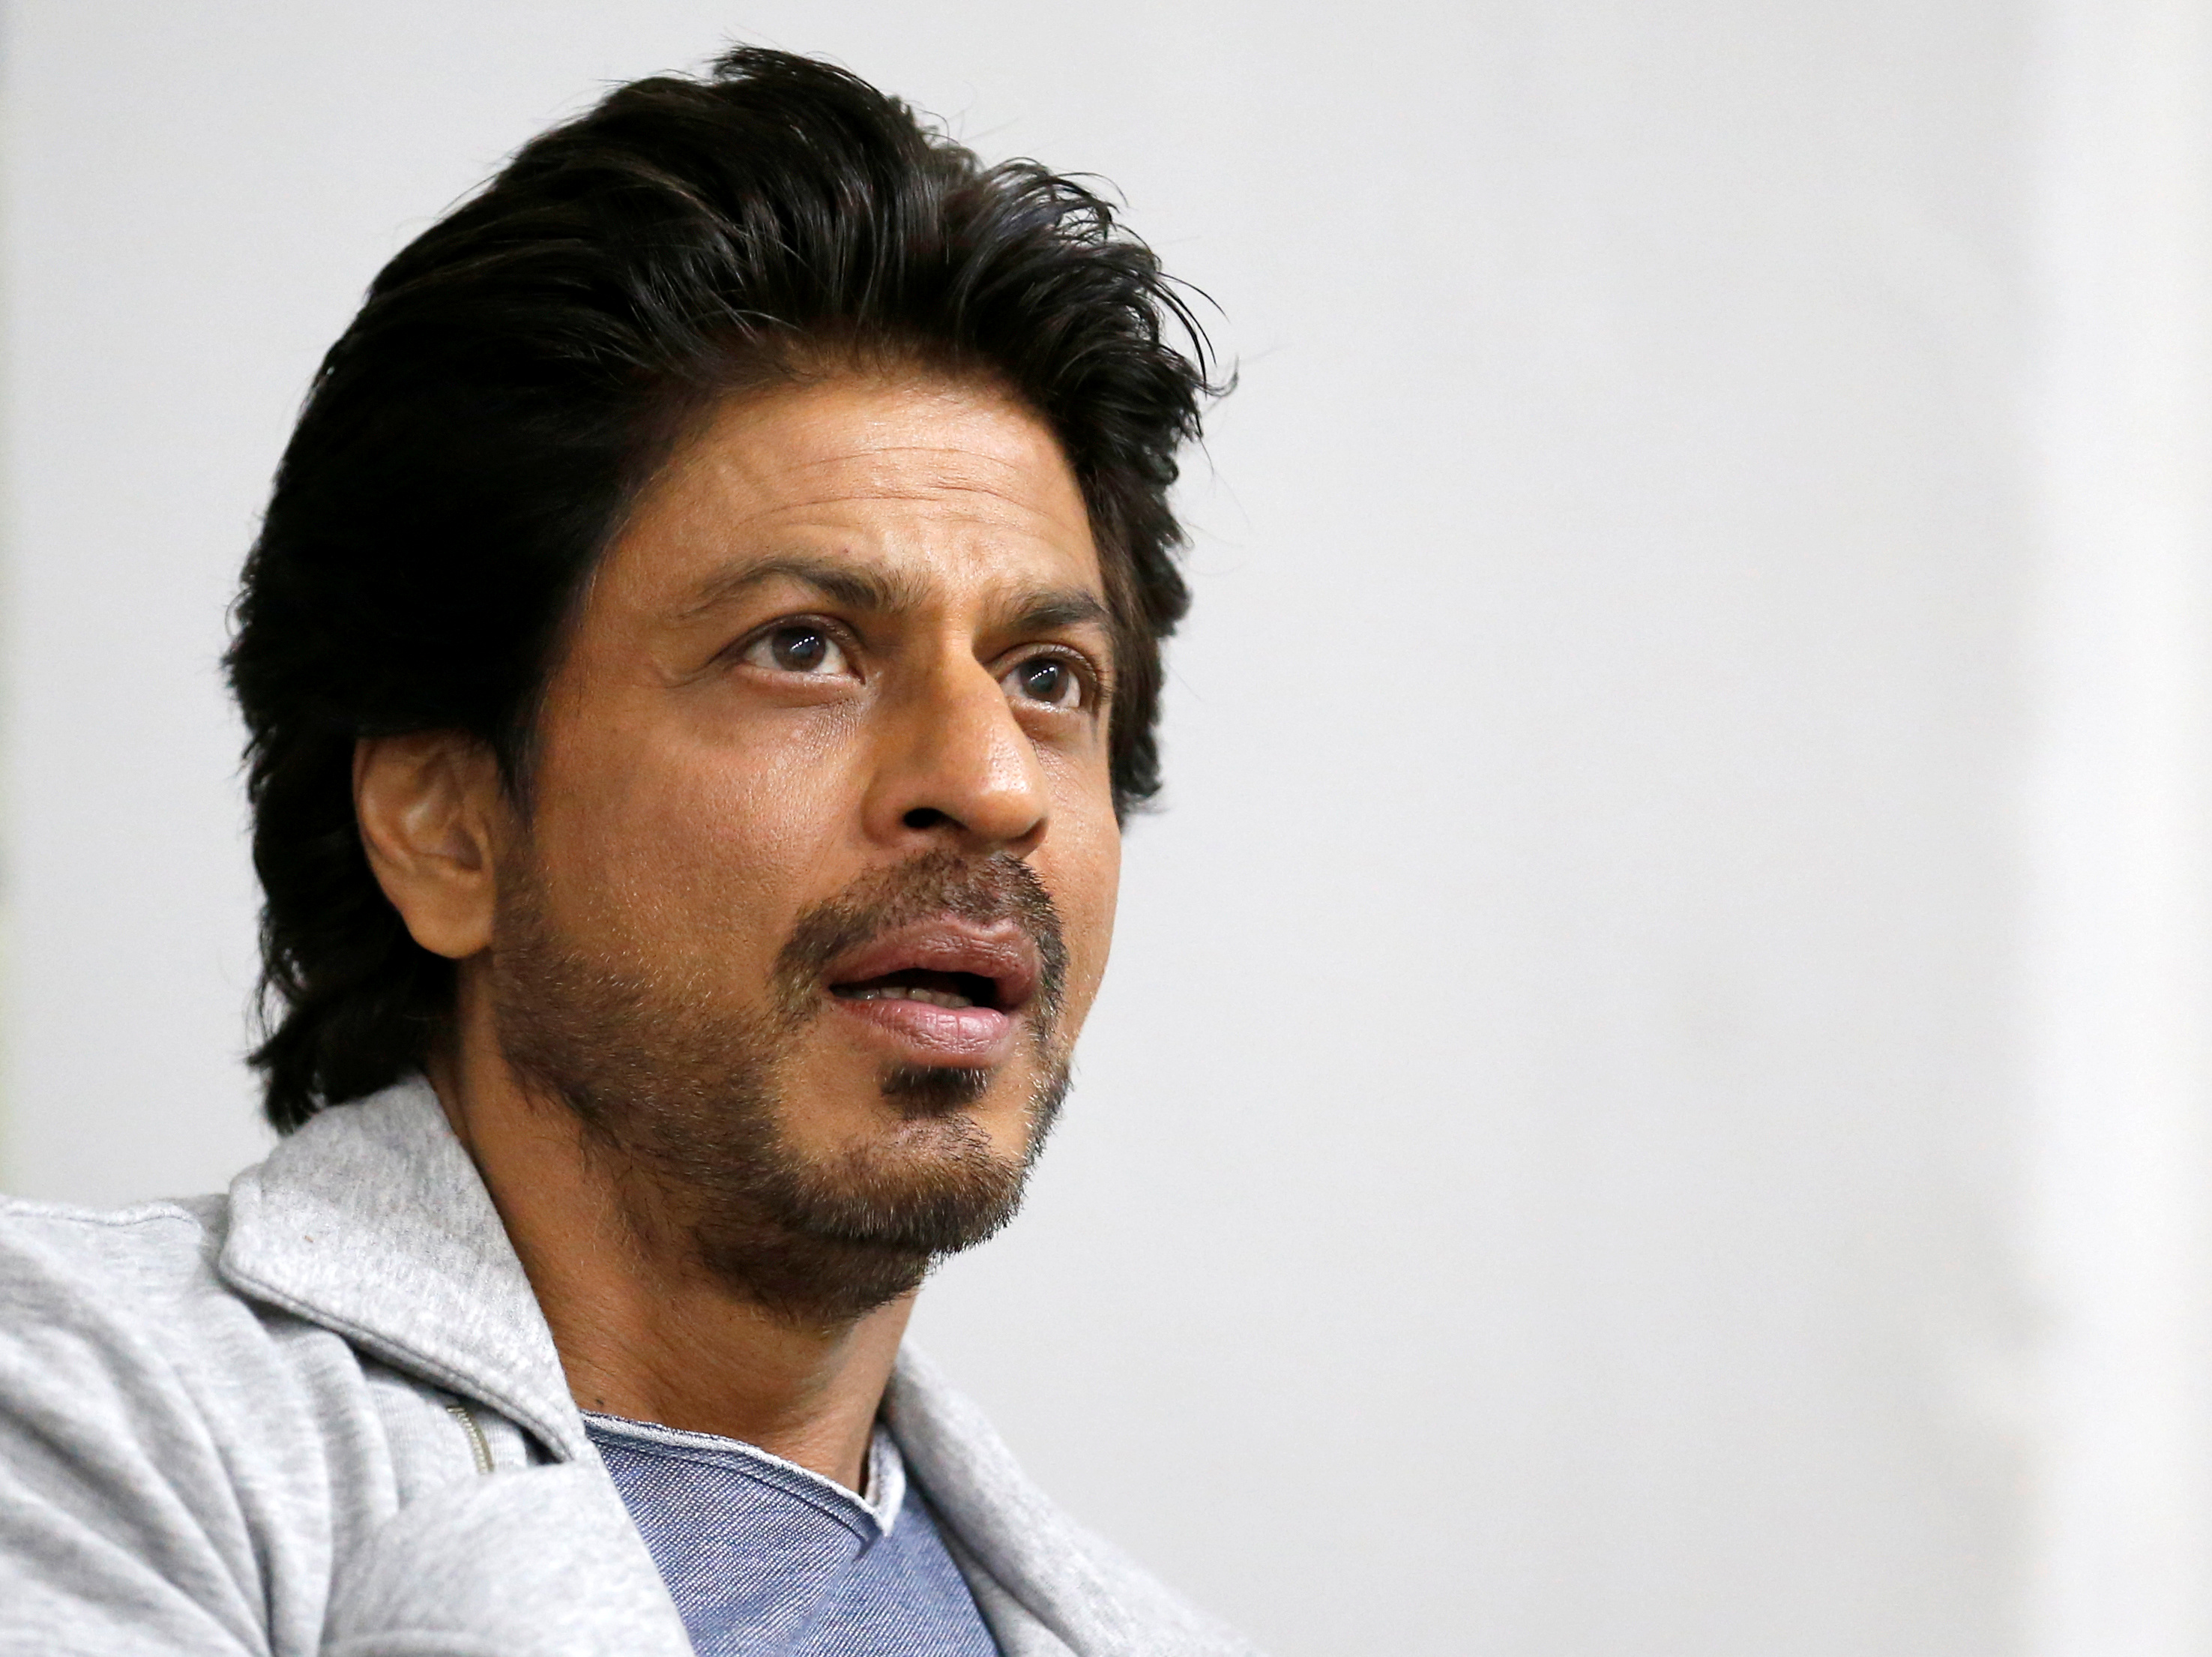 Why Shah Rukh Khan's time as a global Muslim icon is over | Middle East Eye